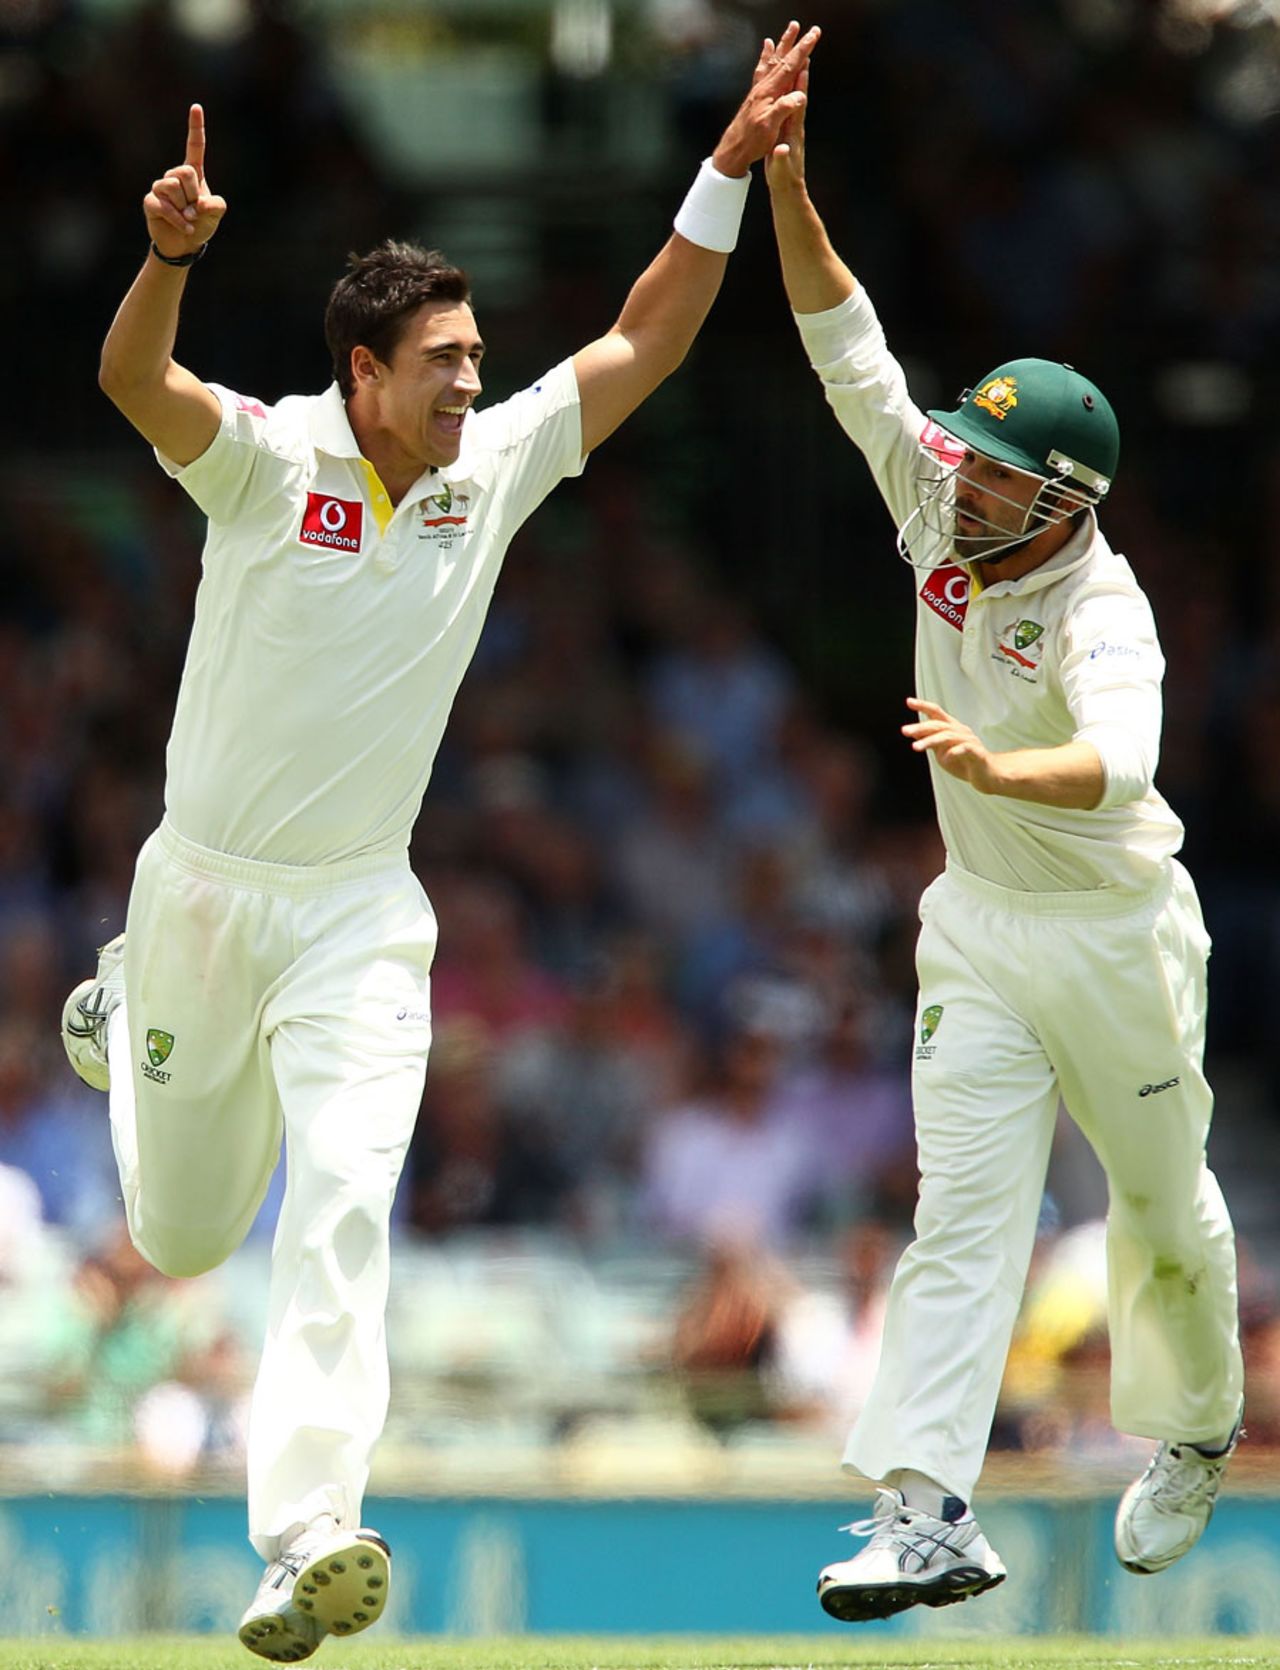 Mitchell Starc struck twice just prior to lunch, Australia v South Africa, 3rd Test, Perth, 1st day, November 30, 2012